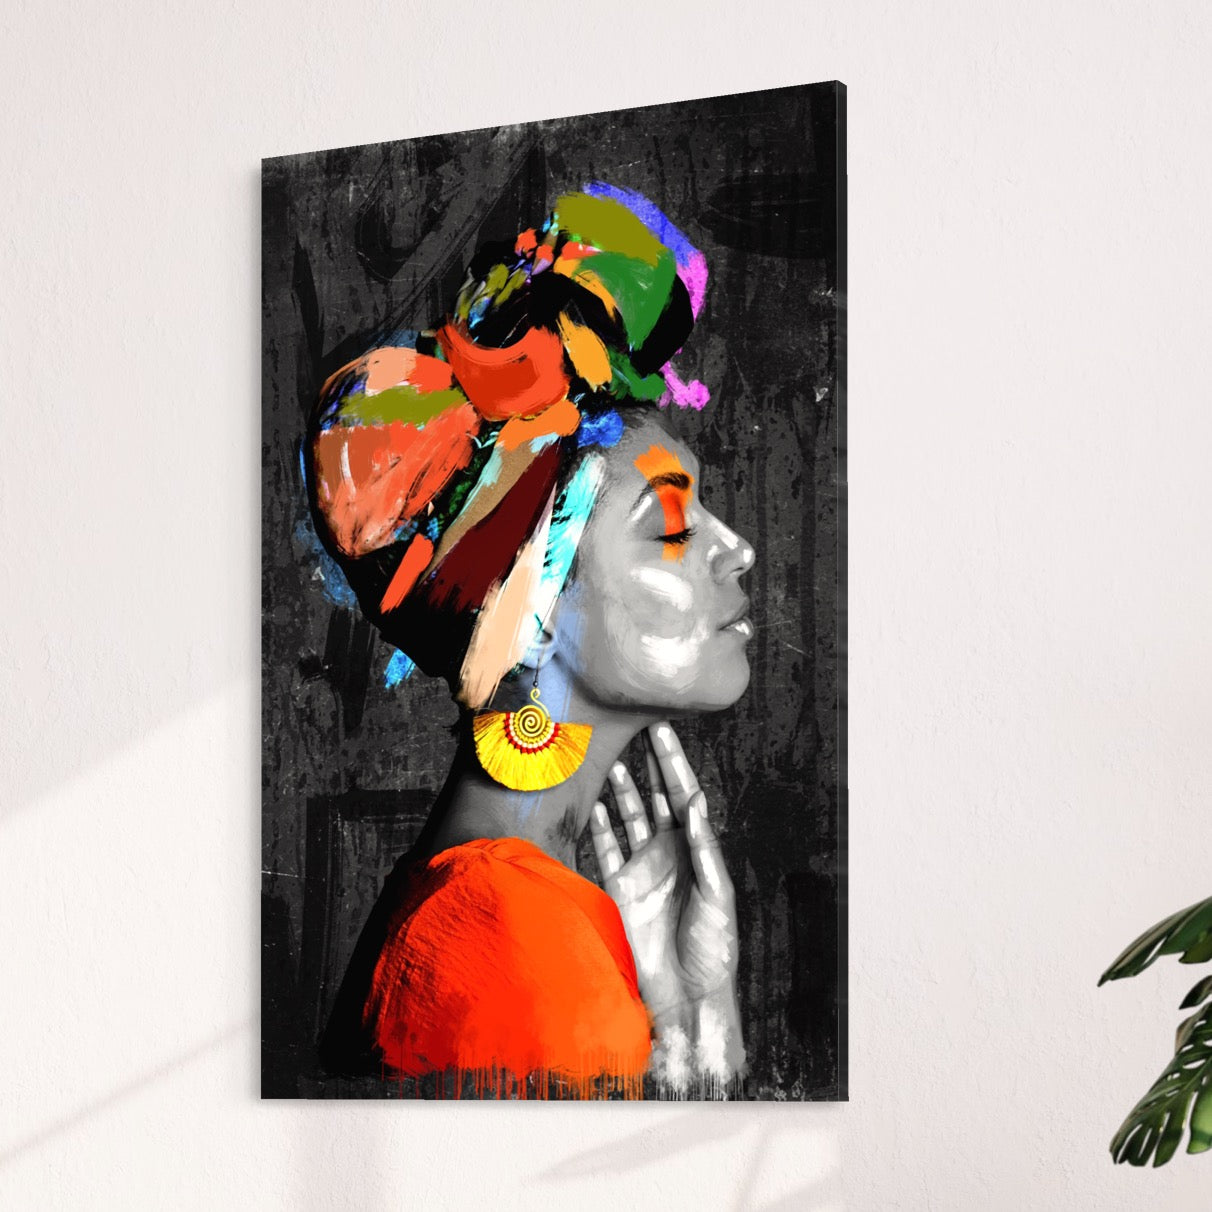 Harmony Embodied | Canvas Reflecting Woman's Inner Peace